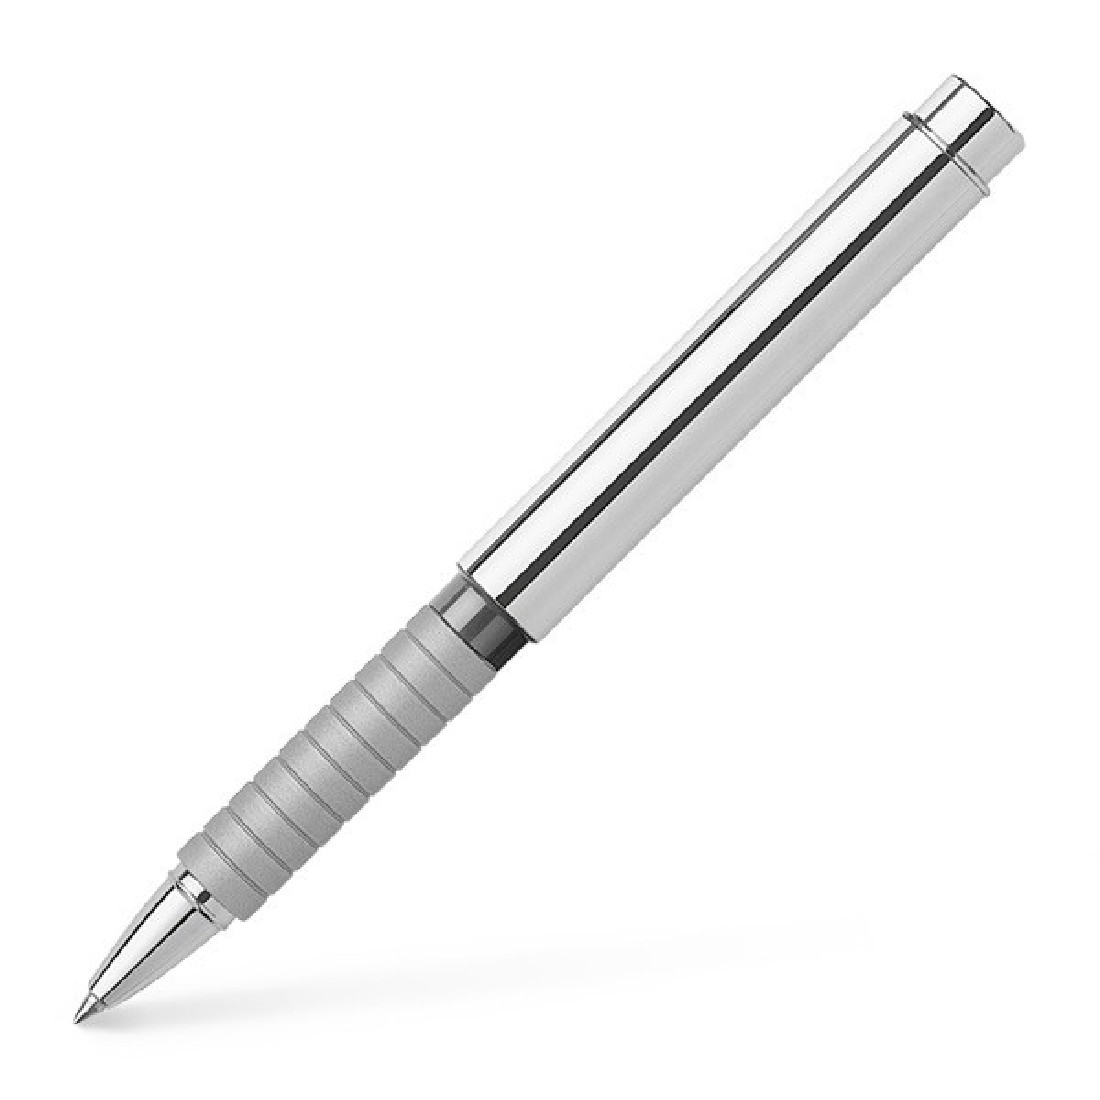 Faber Castell Basic Metal Polished Silver Cap Rollerball Pen 148461